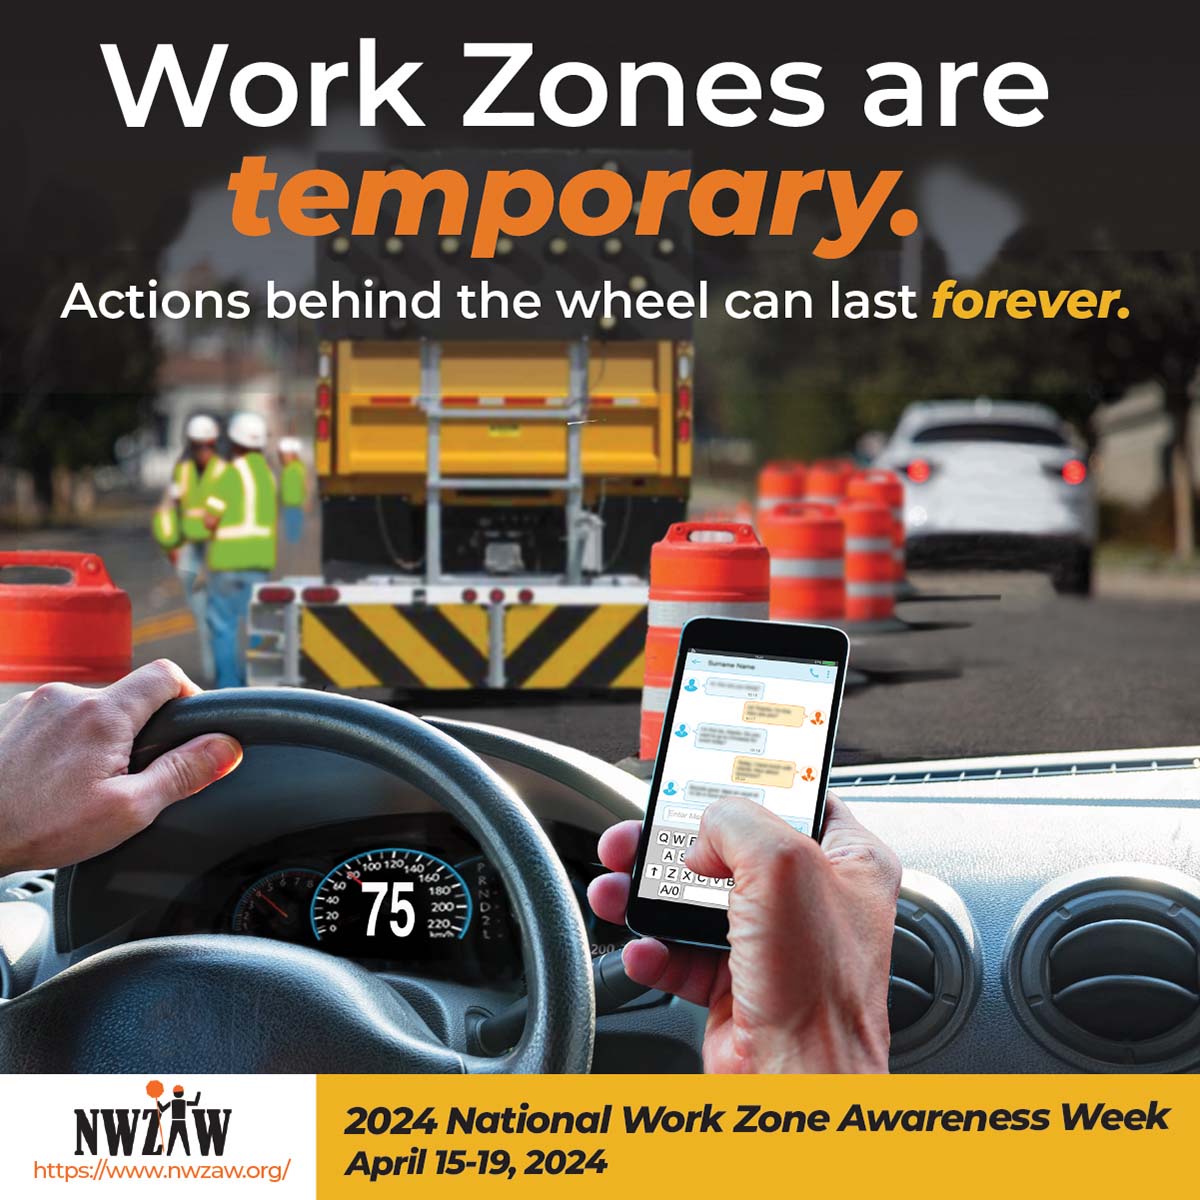 National Work Zone Awareness Week. Work Zones are temporary. Actions behind the wheel can last forever.